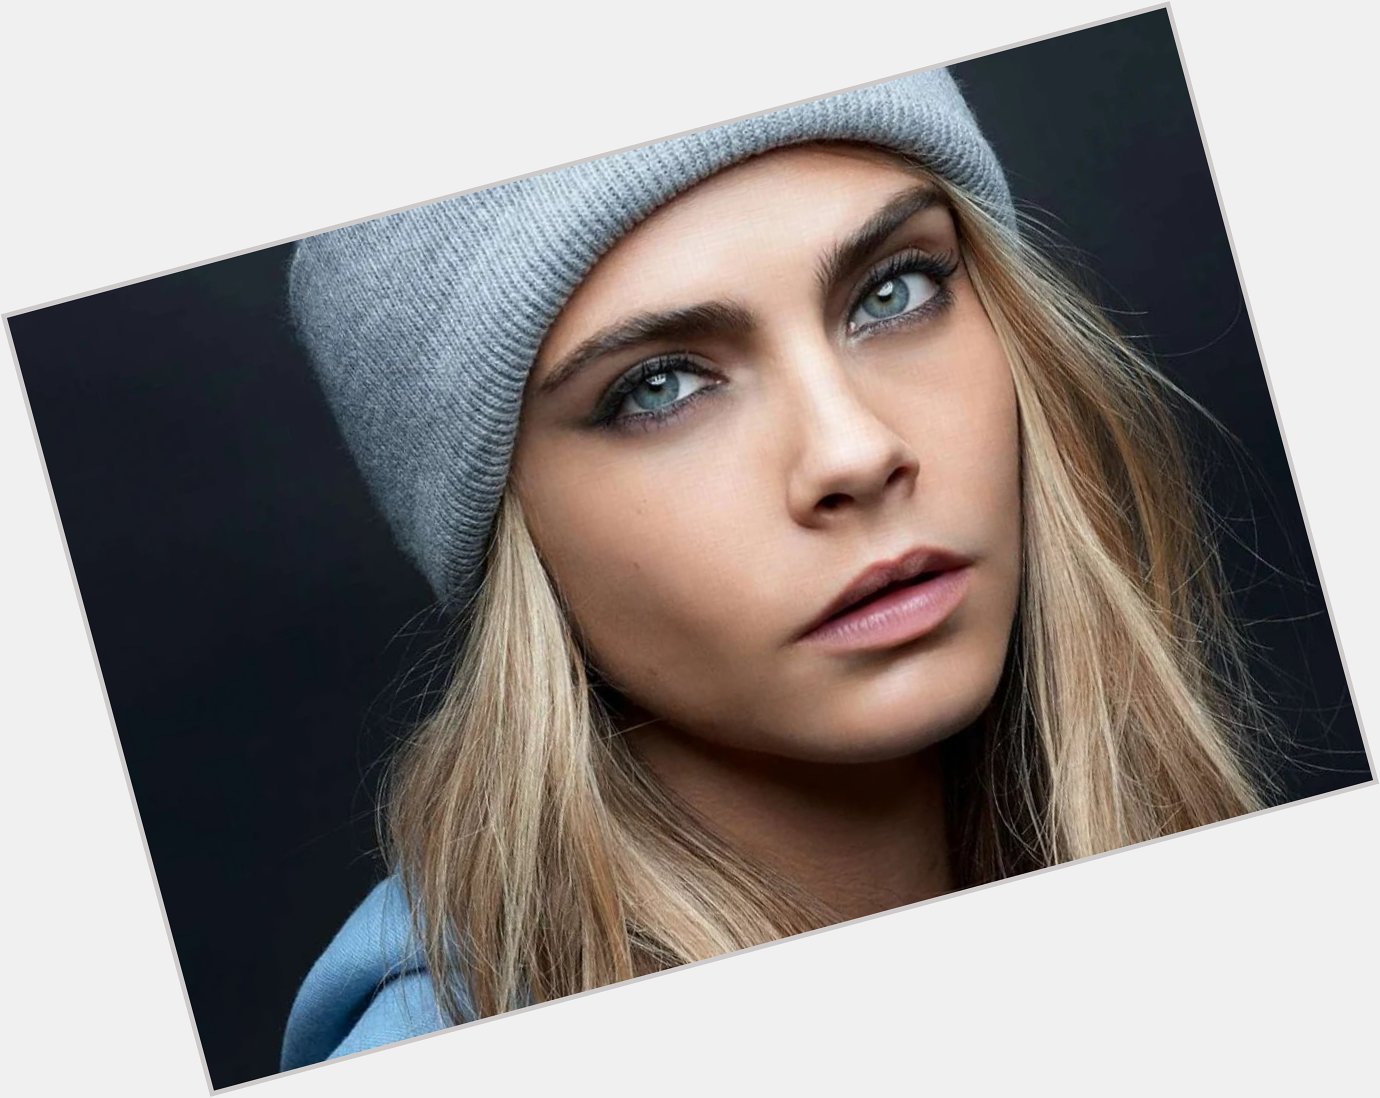 August 12, 2020
Happy birthday to Cara Delevingne 28 years old. 